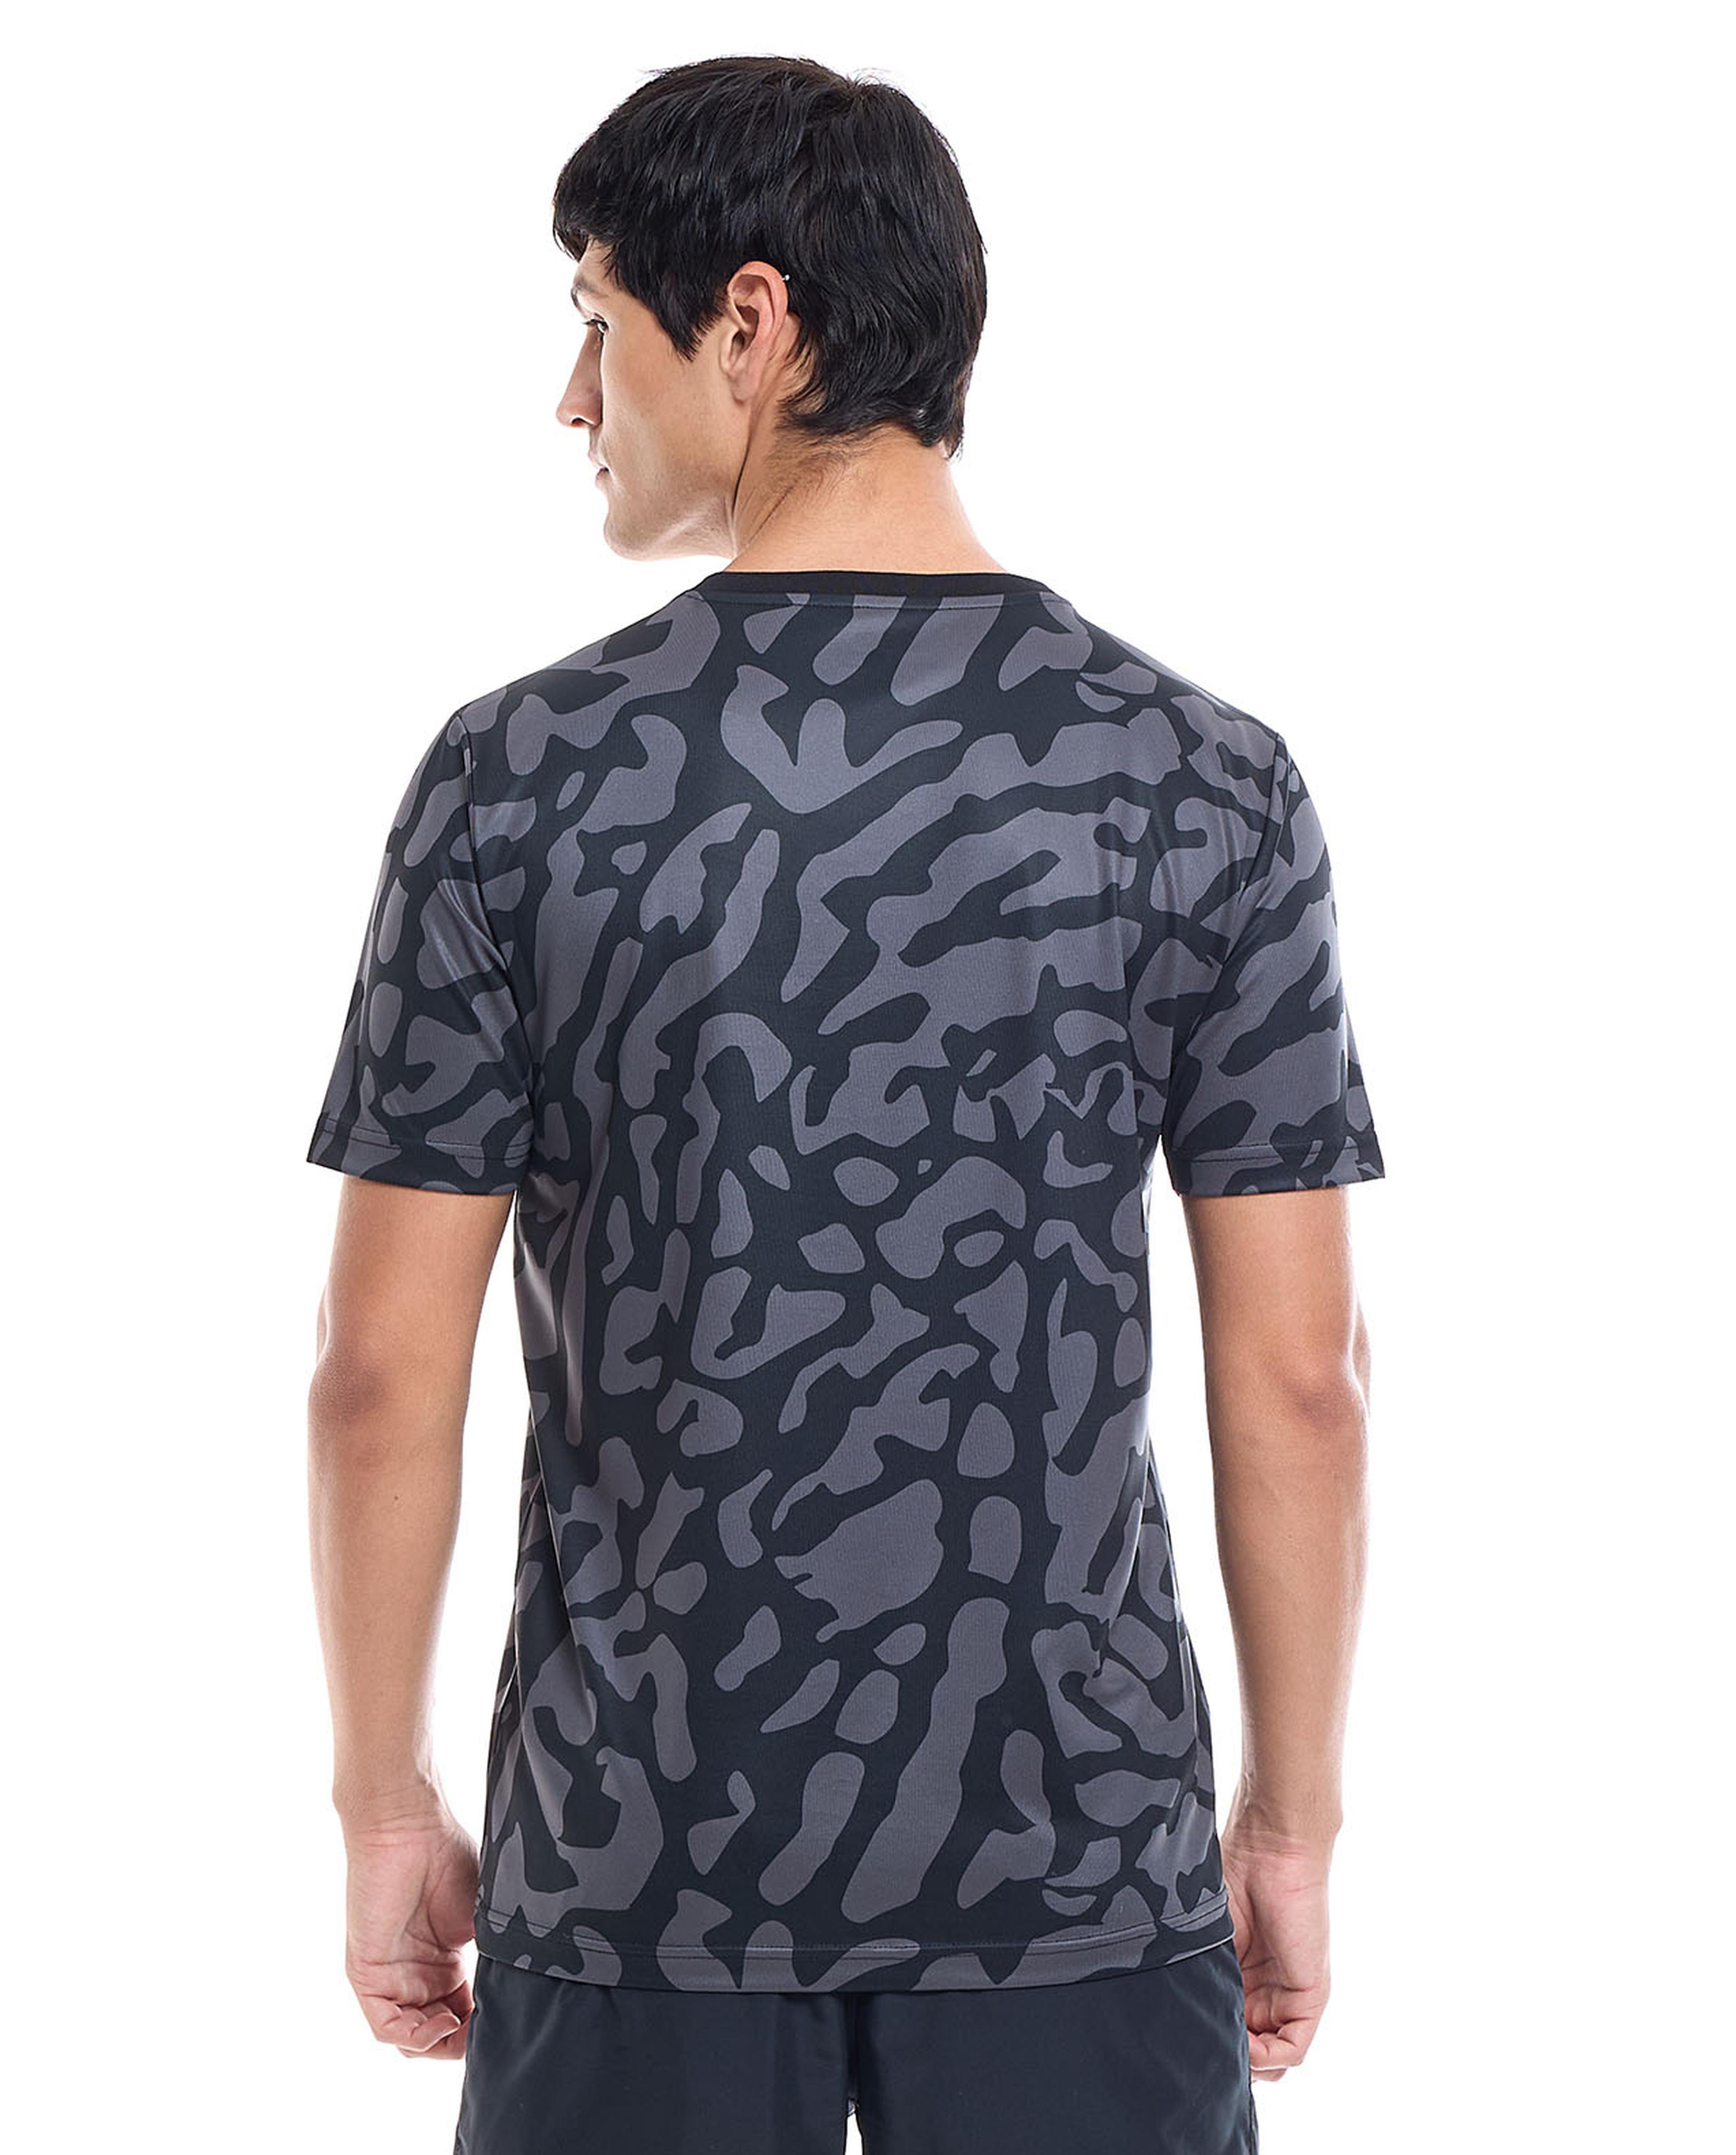 Patterned Active T-Shirt with Crew Neck and Short Sleeves